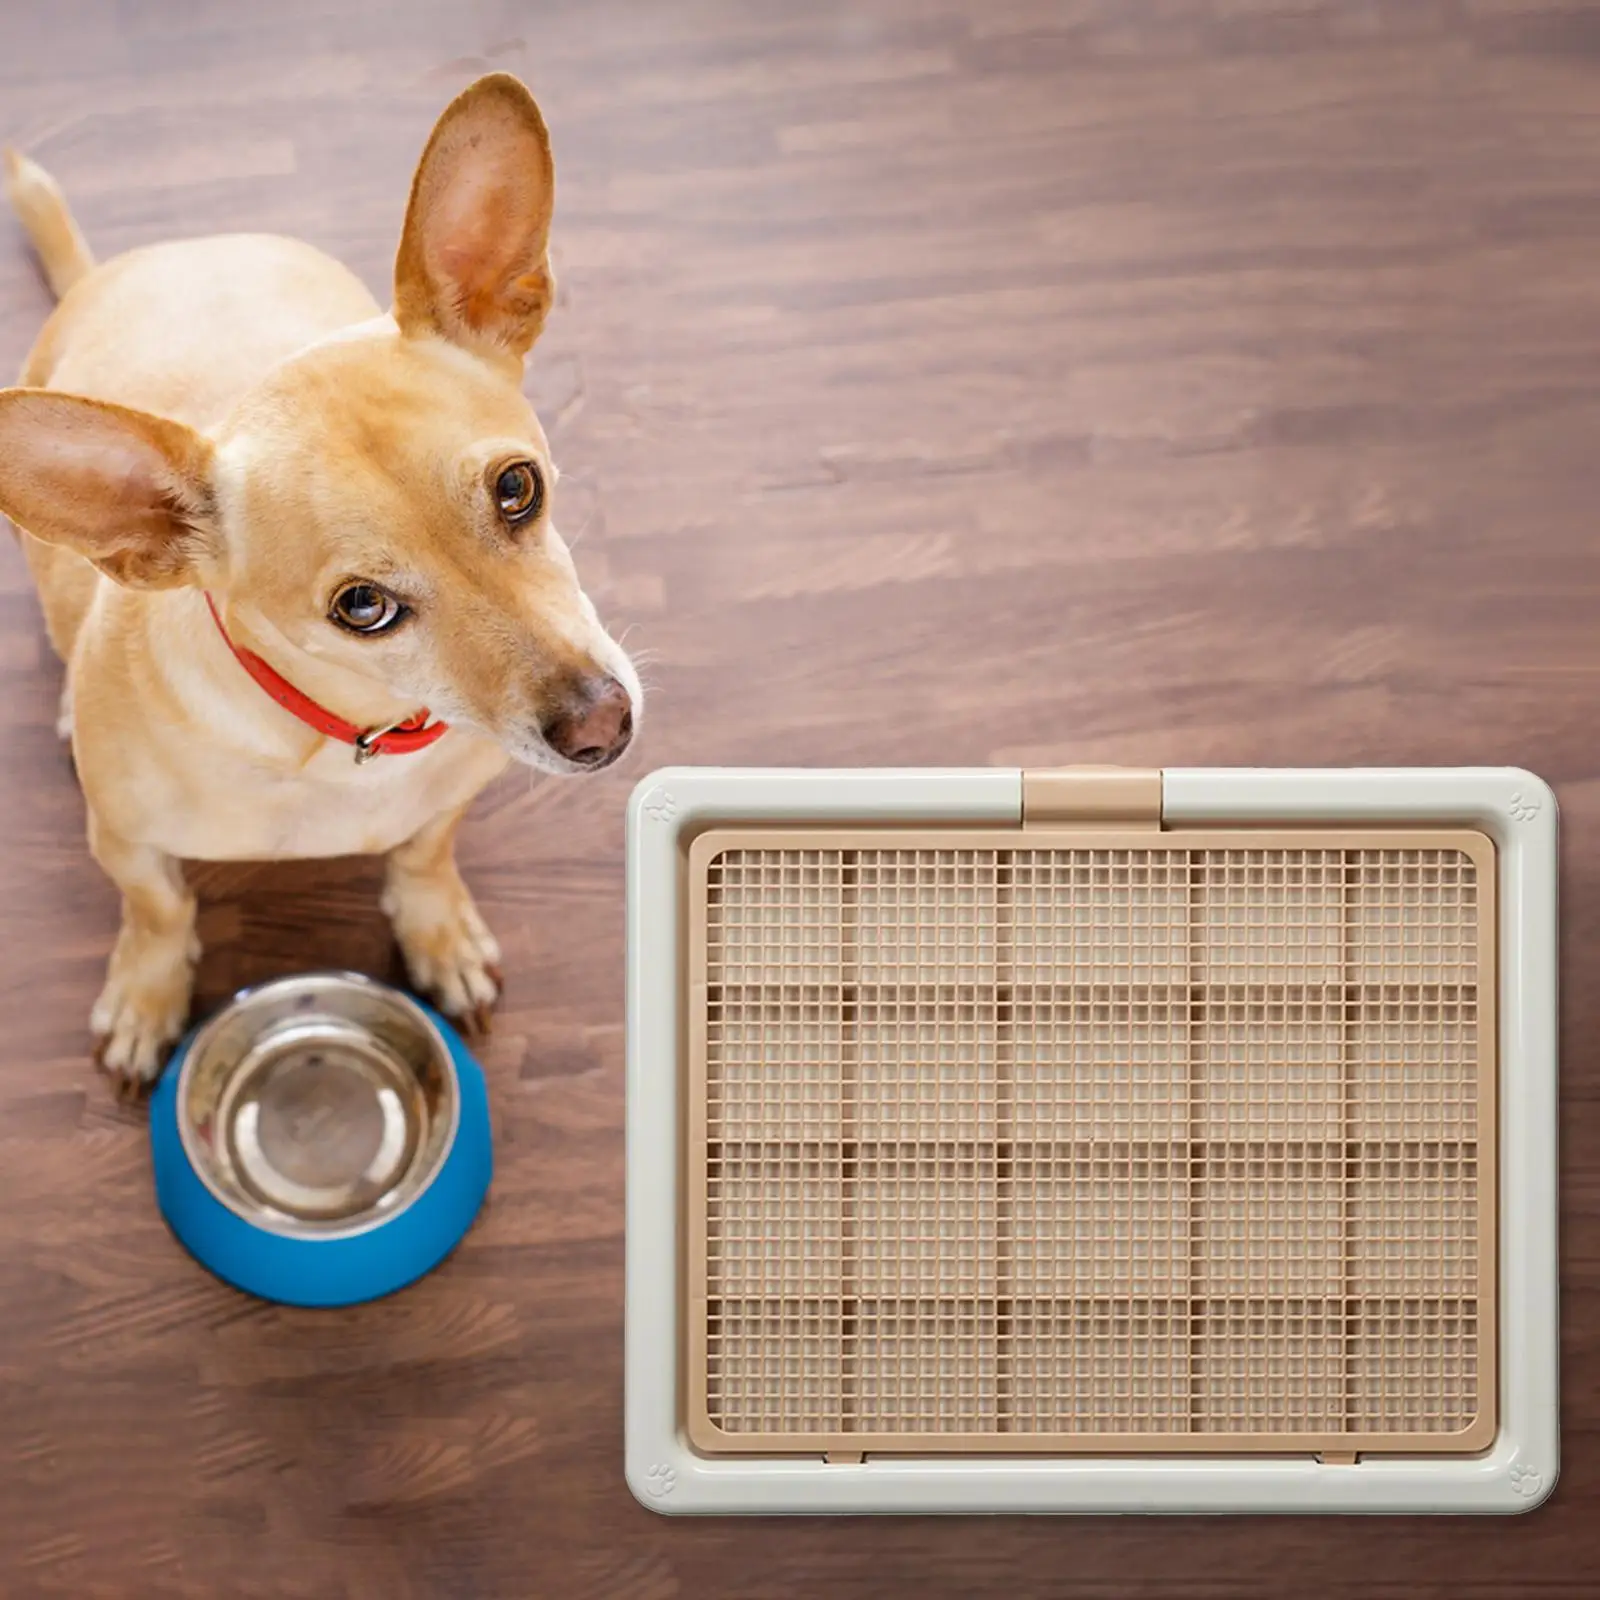 Dog Training Toilet Detachable Keep Paws and Floors Clean Potty Tray